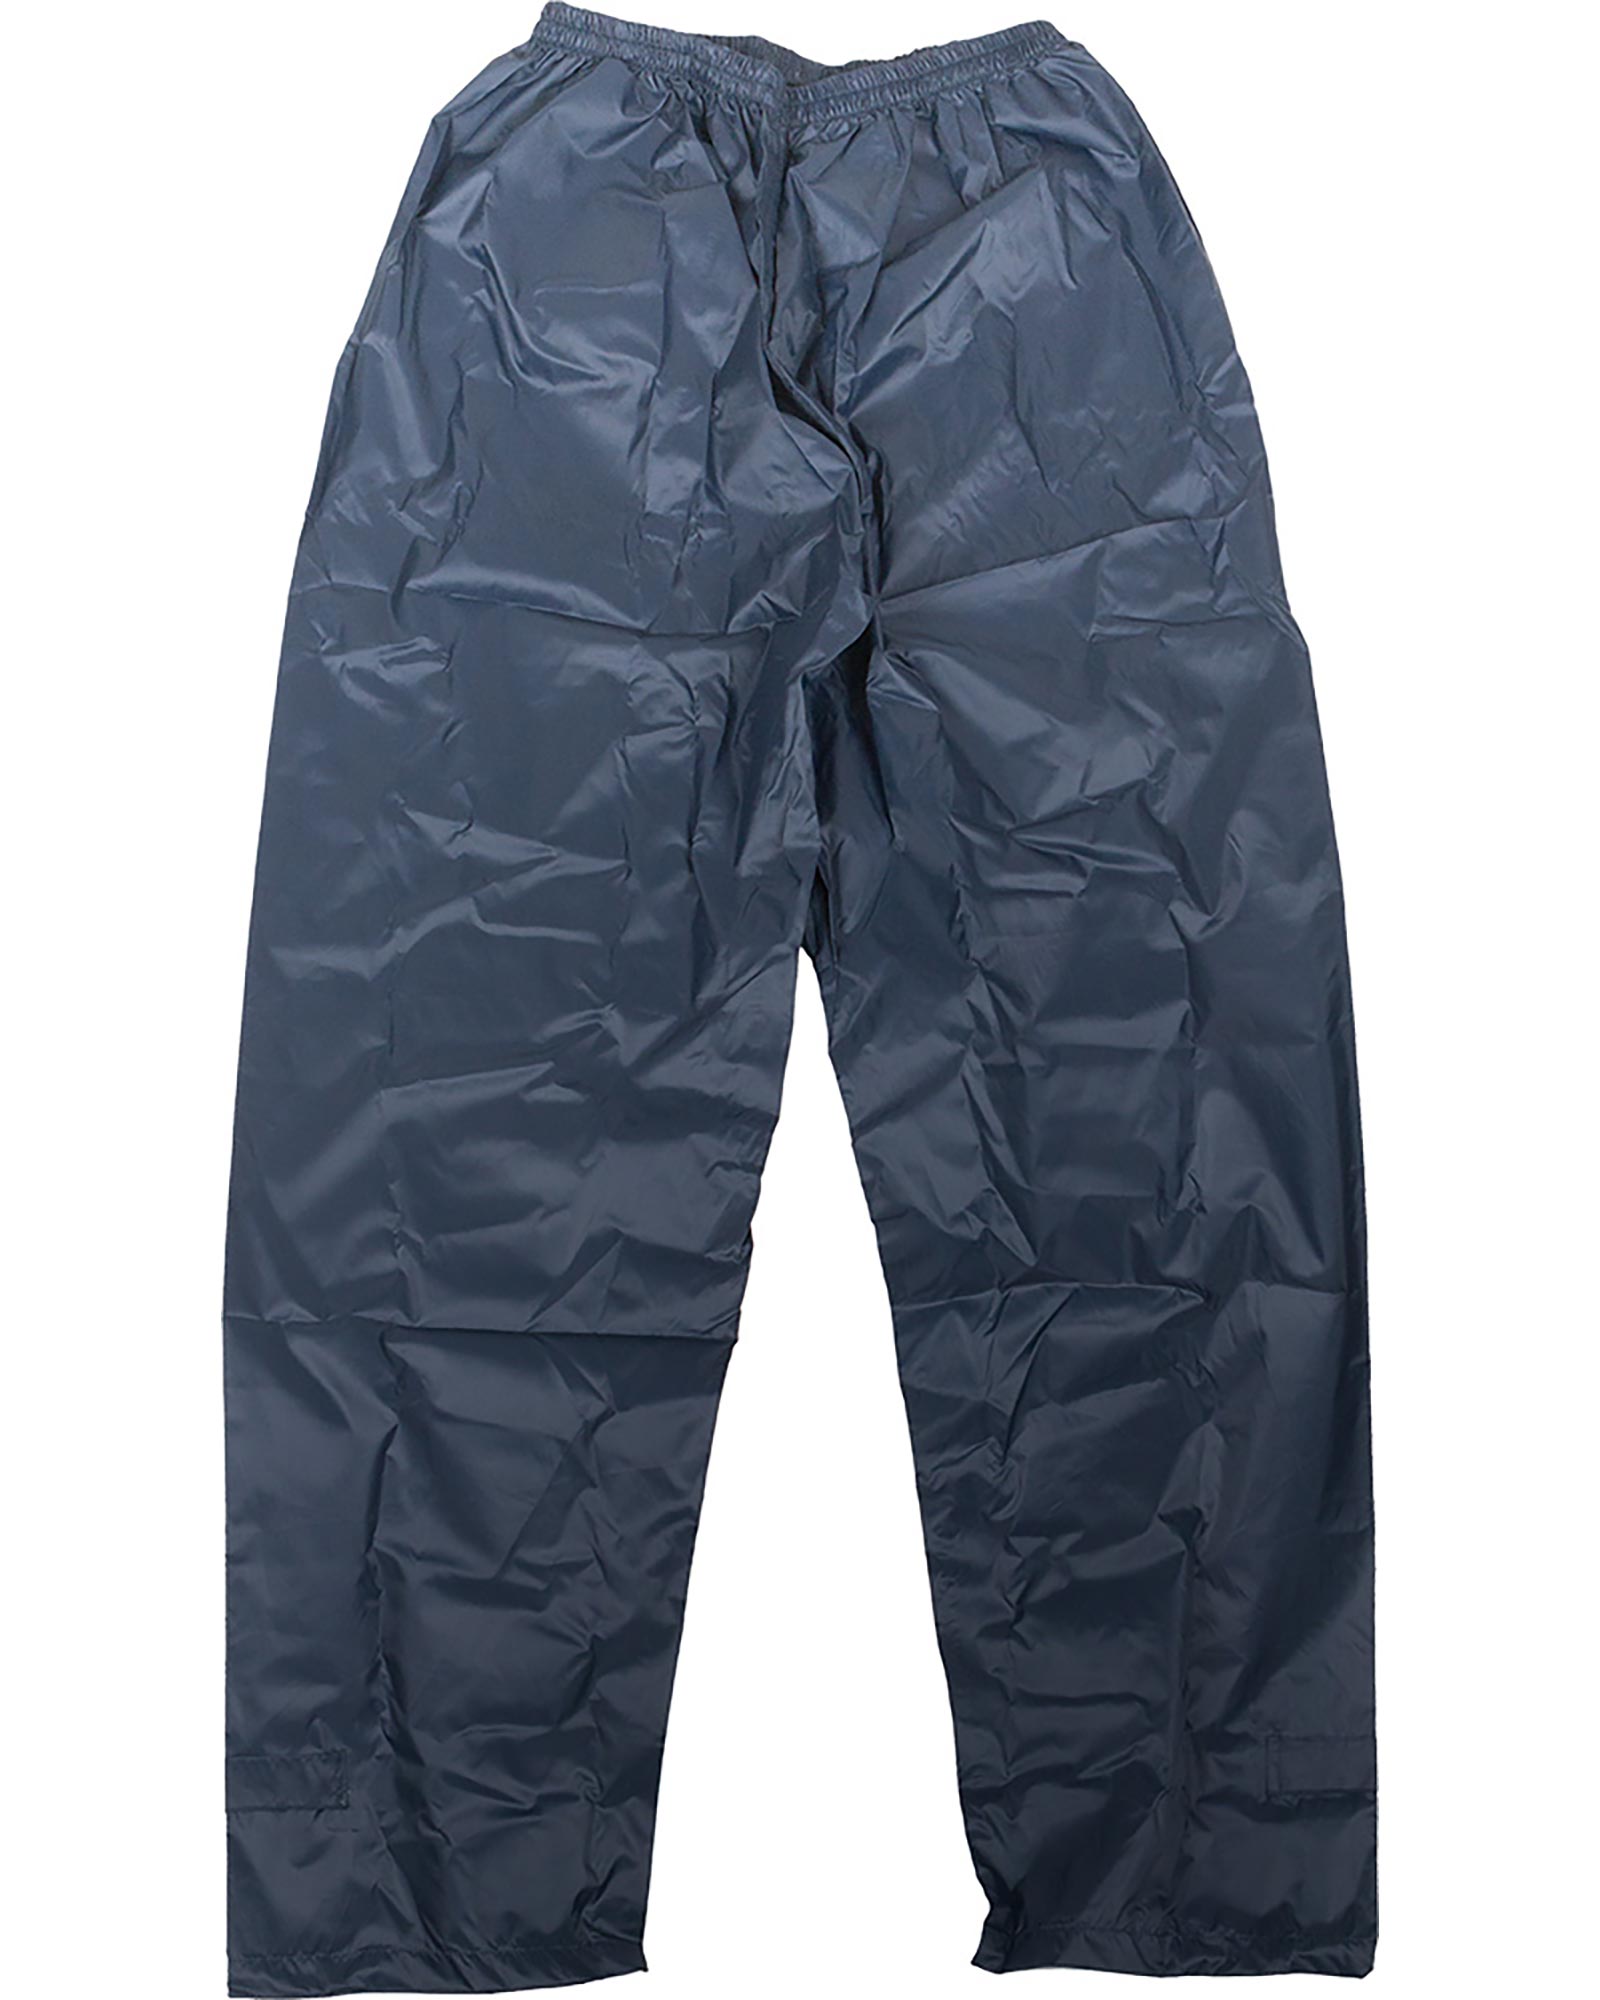 Target Dry Mac In A Sac Adult Packable Waterproof Overtrousers